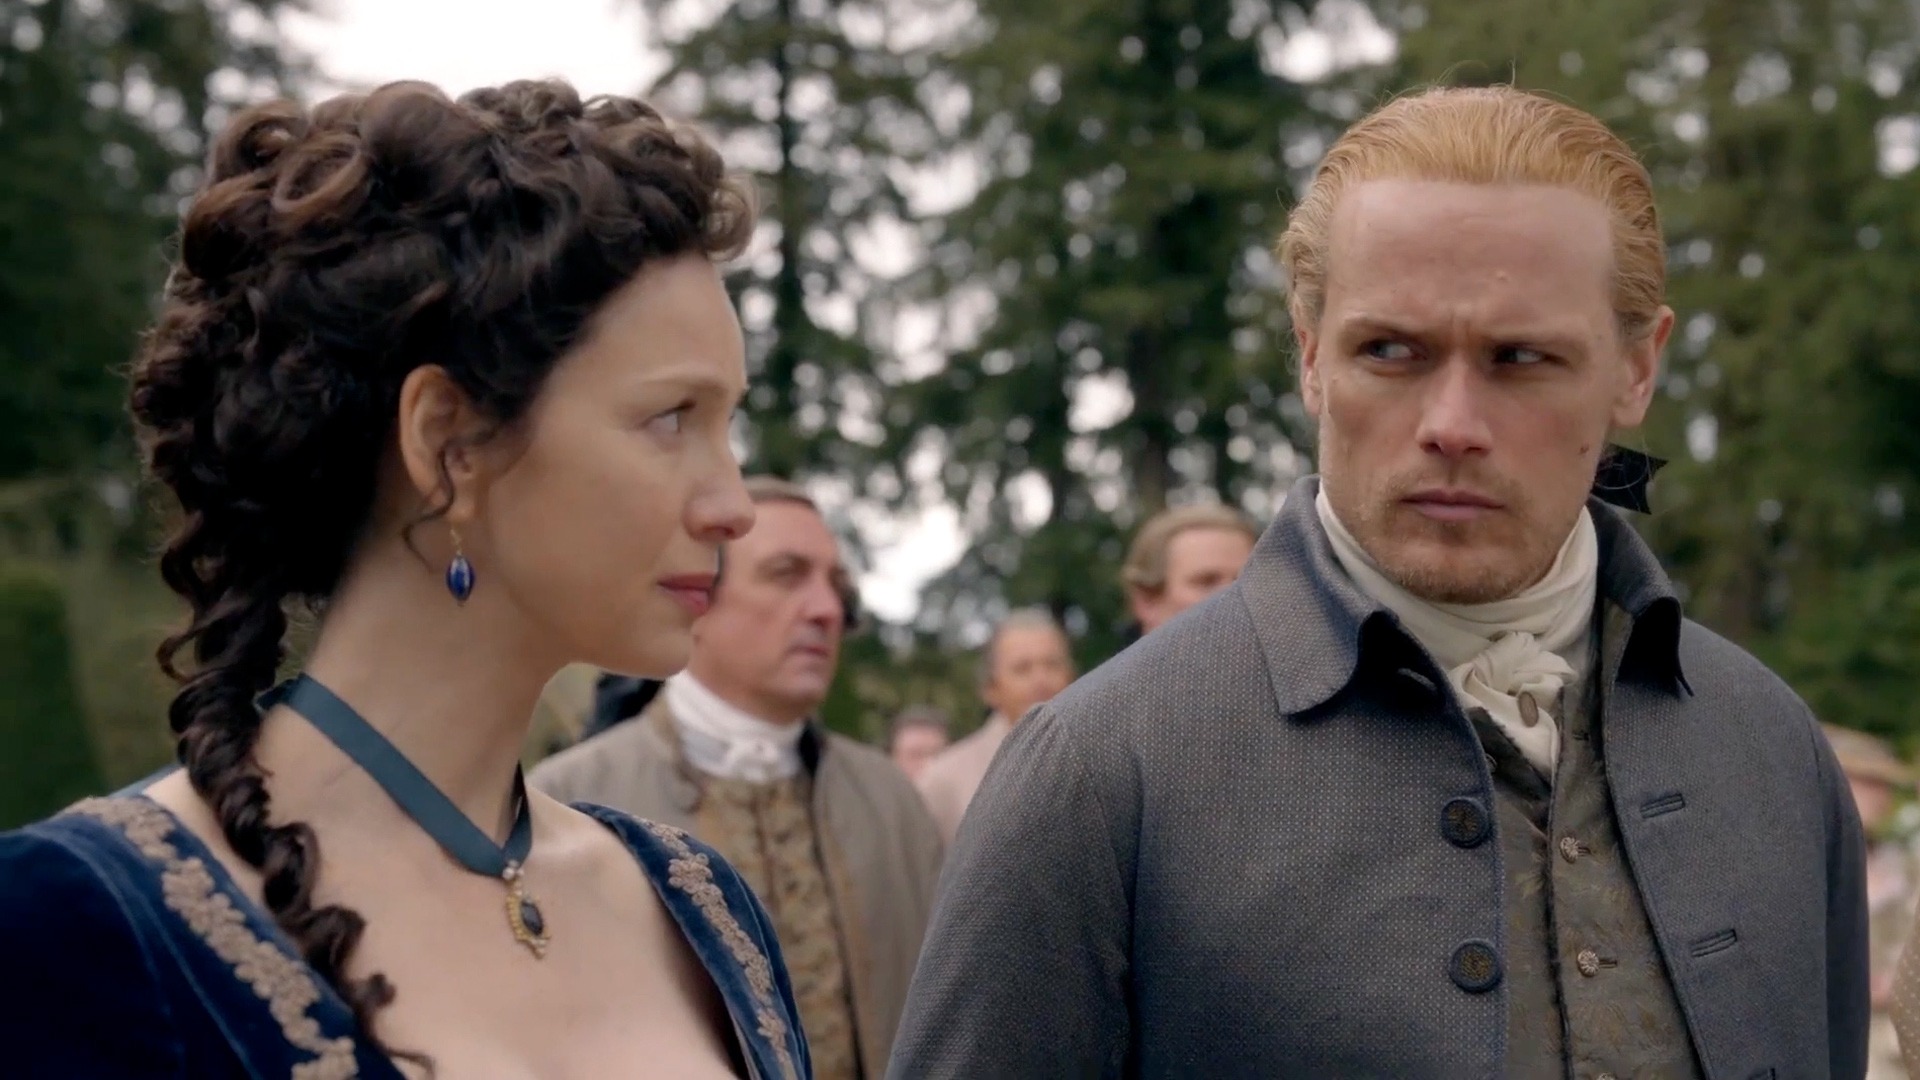 Outlander  Rotten Tomatoes